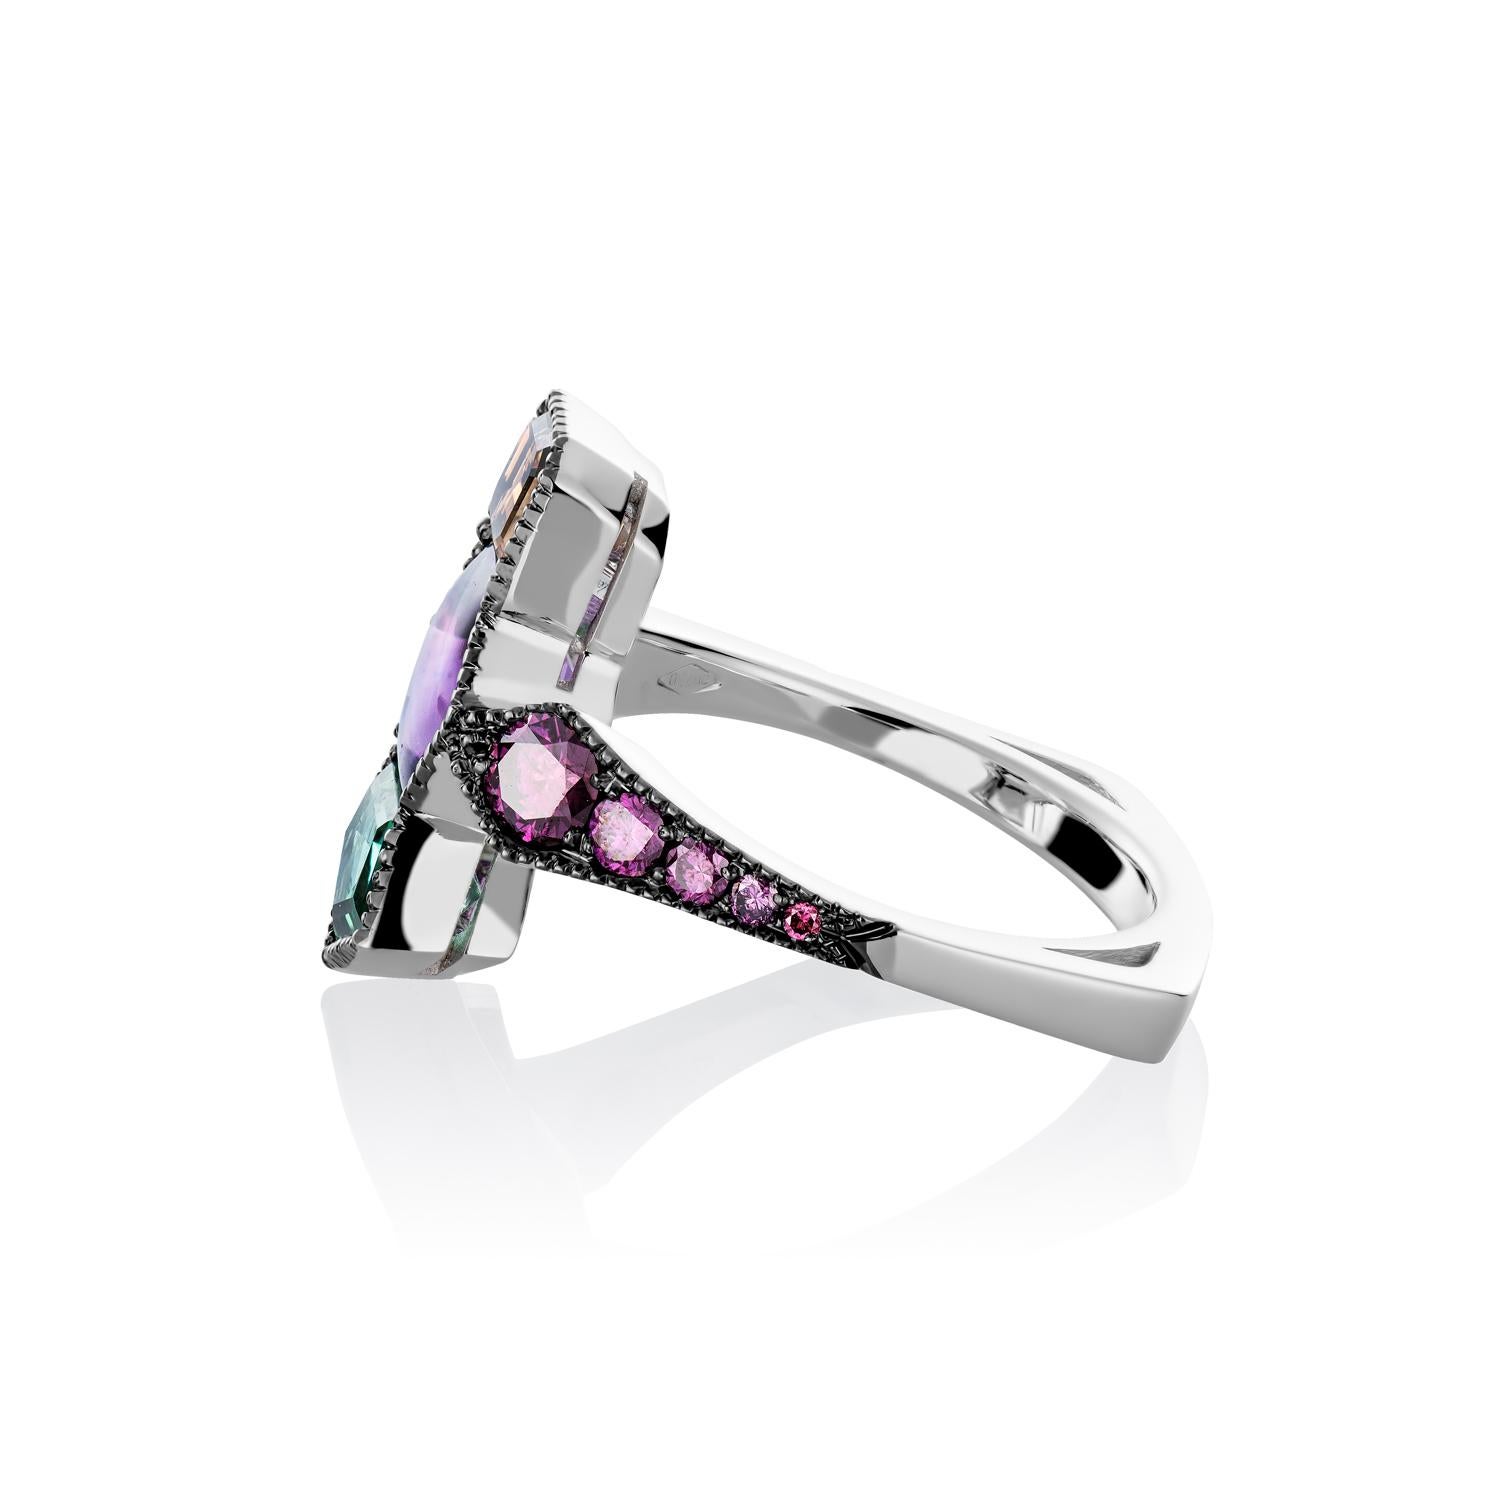 One of a kind Millegrain Ring in 18K White gold 6,1 g.  set with a Cognac diamond 0,54 ct., pentagon cut Tourmaline, a hexagon cut Amethyst and natural coloured purple diamonds 0,61ct.. 

The natural colored purple diamonds are natural diamonds but